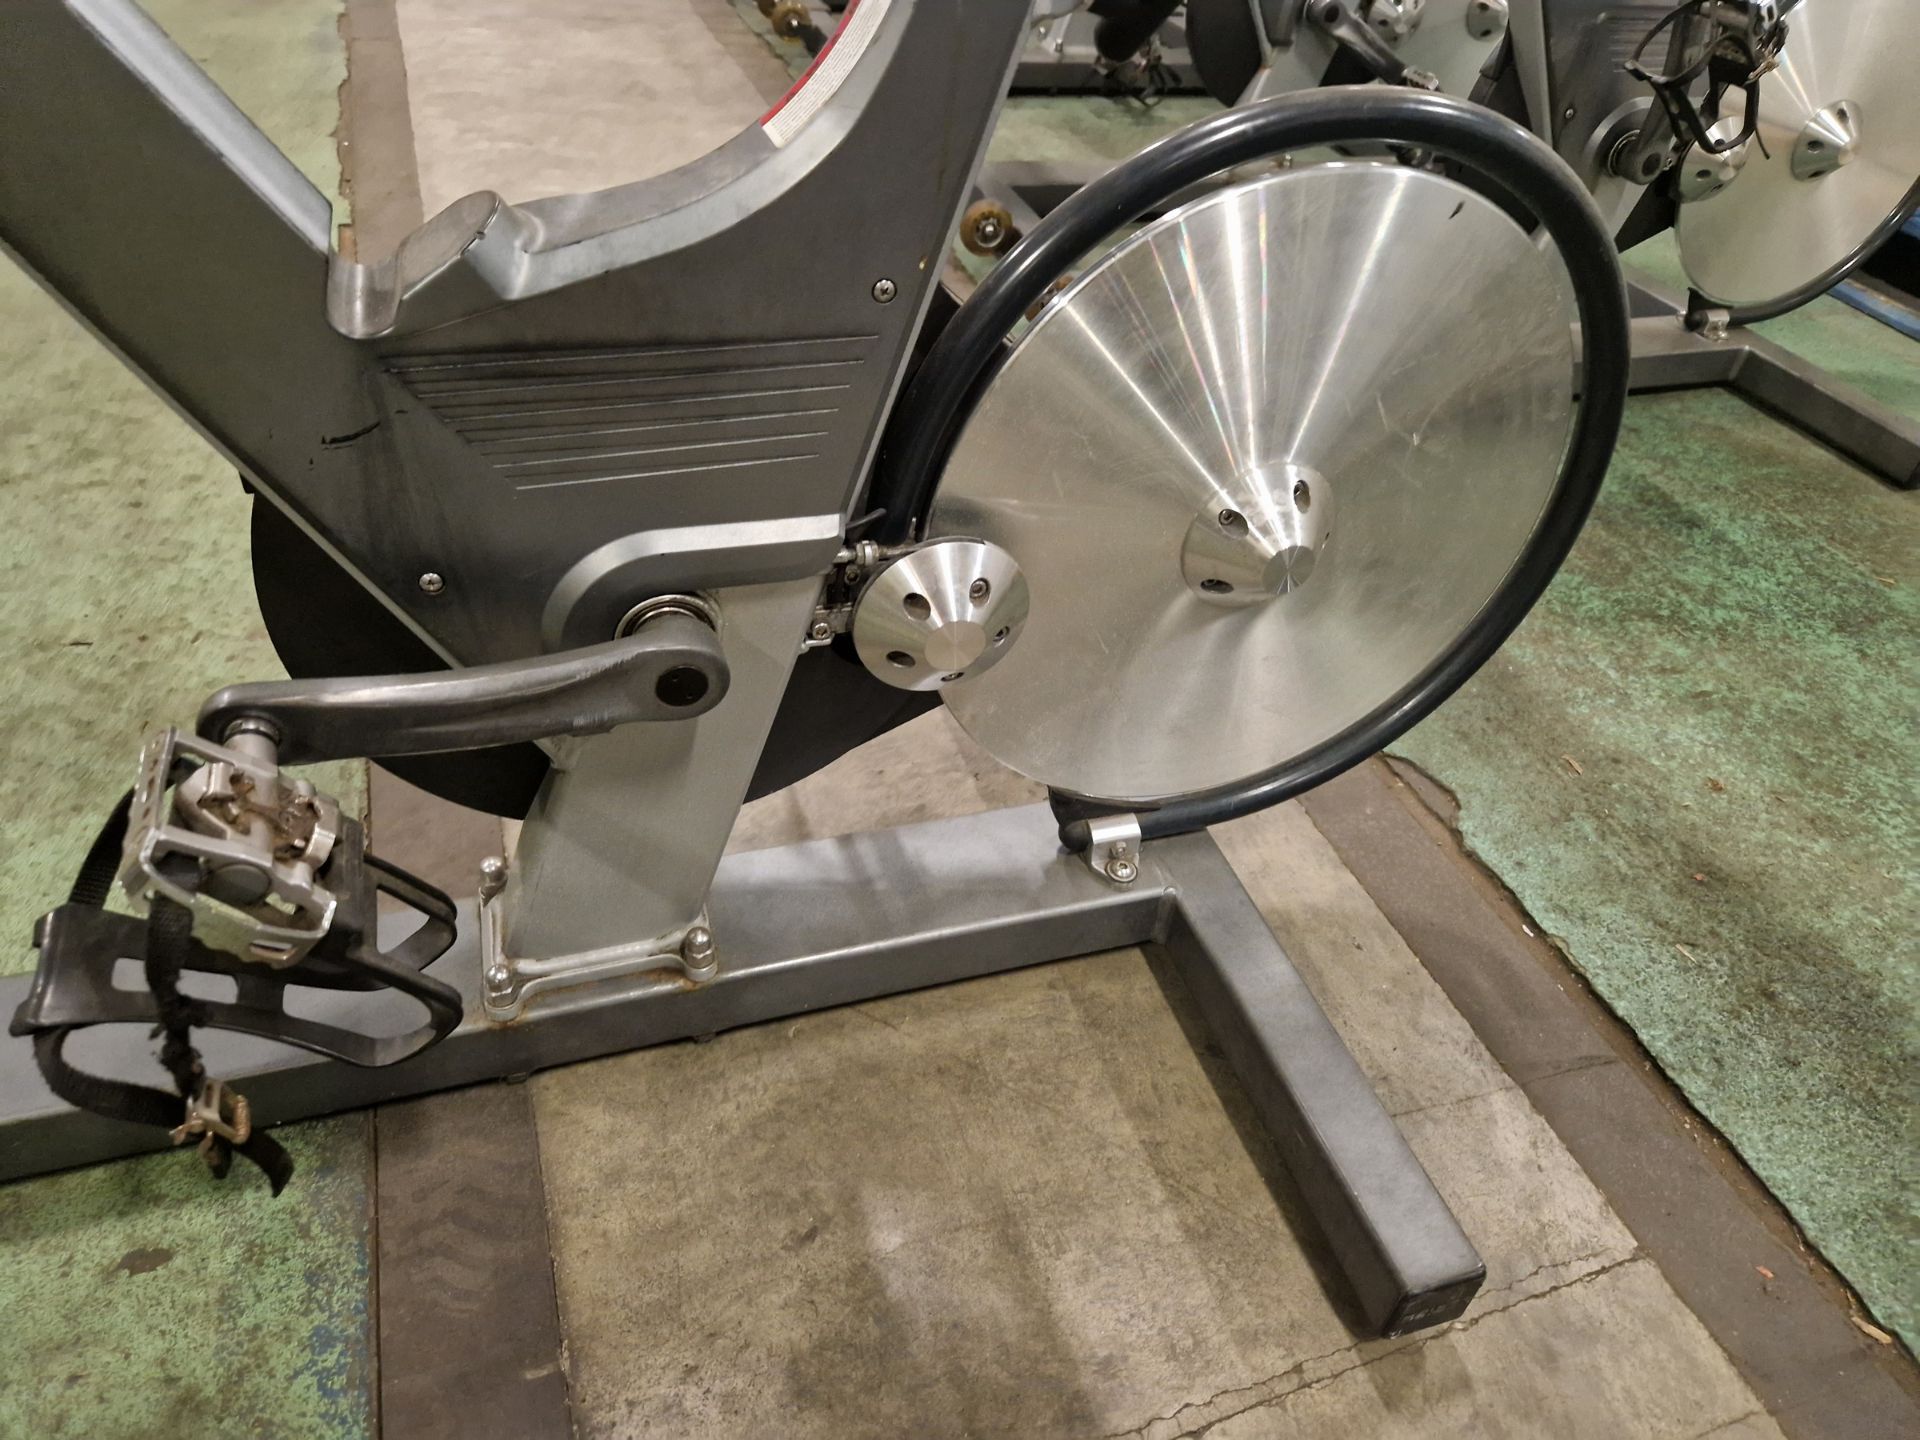 Keiser M3 exercise spin bike - NON FUNCTIONAL DISPLAY - Image 4 of 5